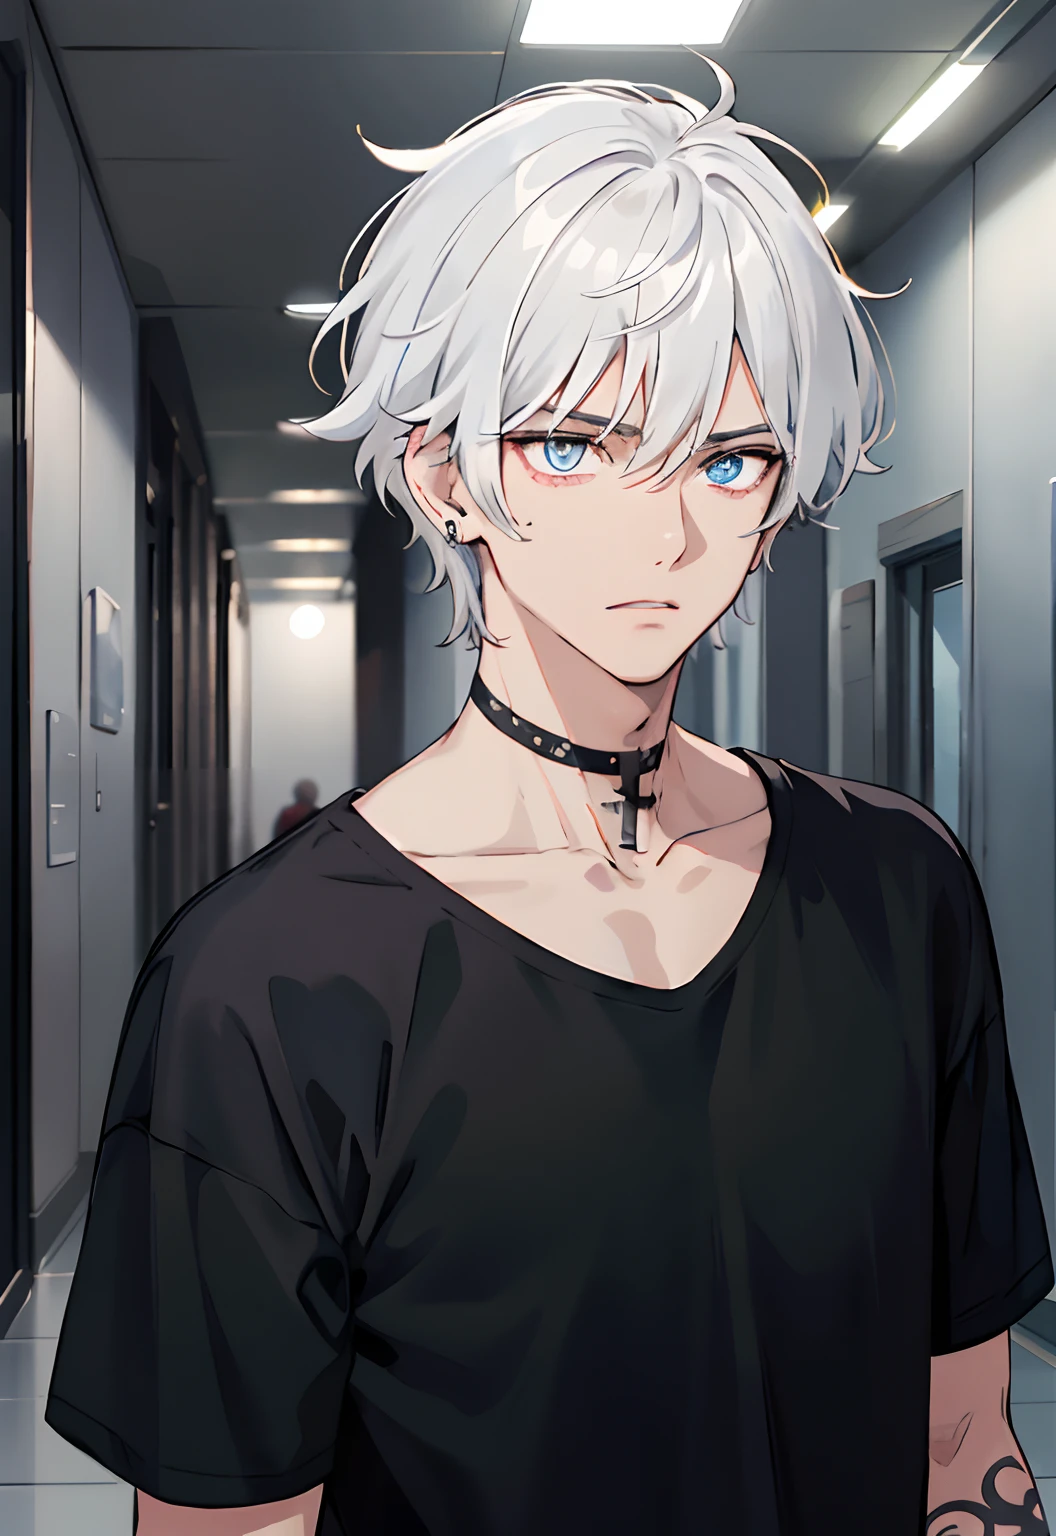 Anime guy with white hair and blue eyes in a hallway - SeaArt AI